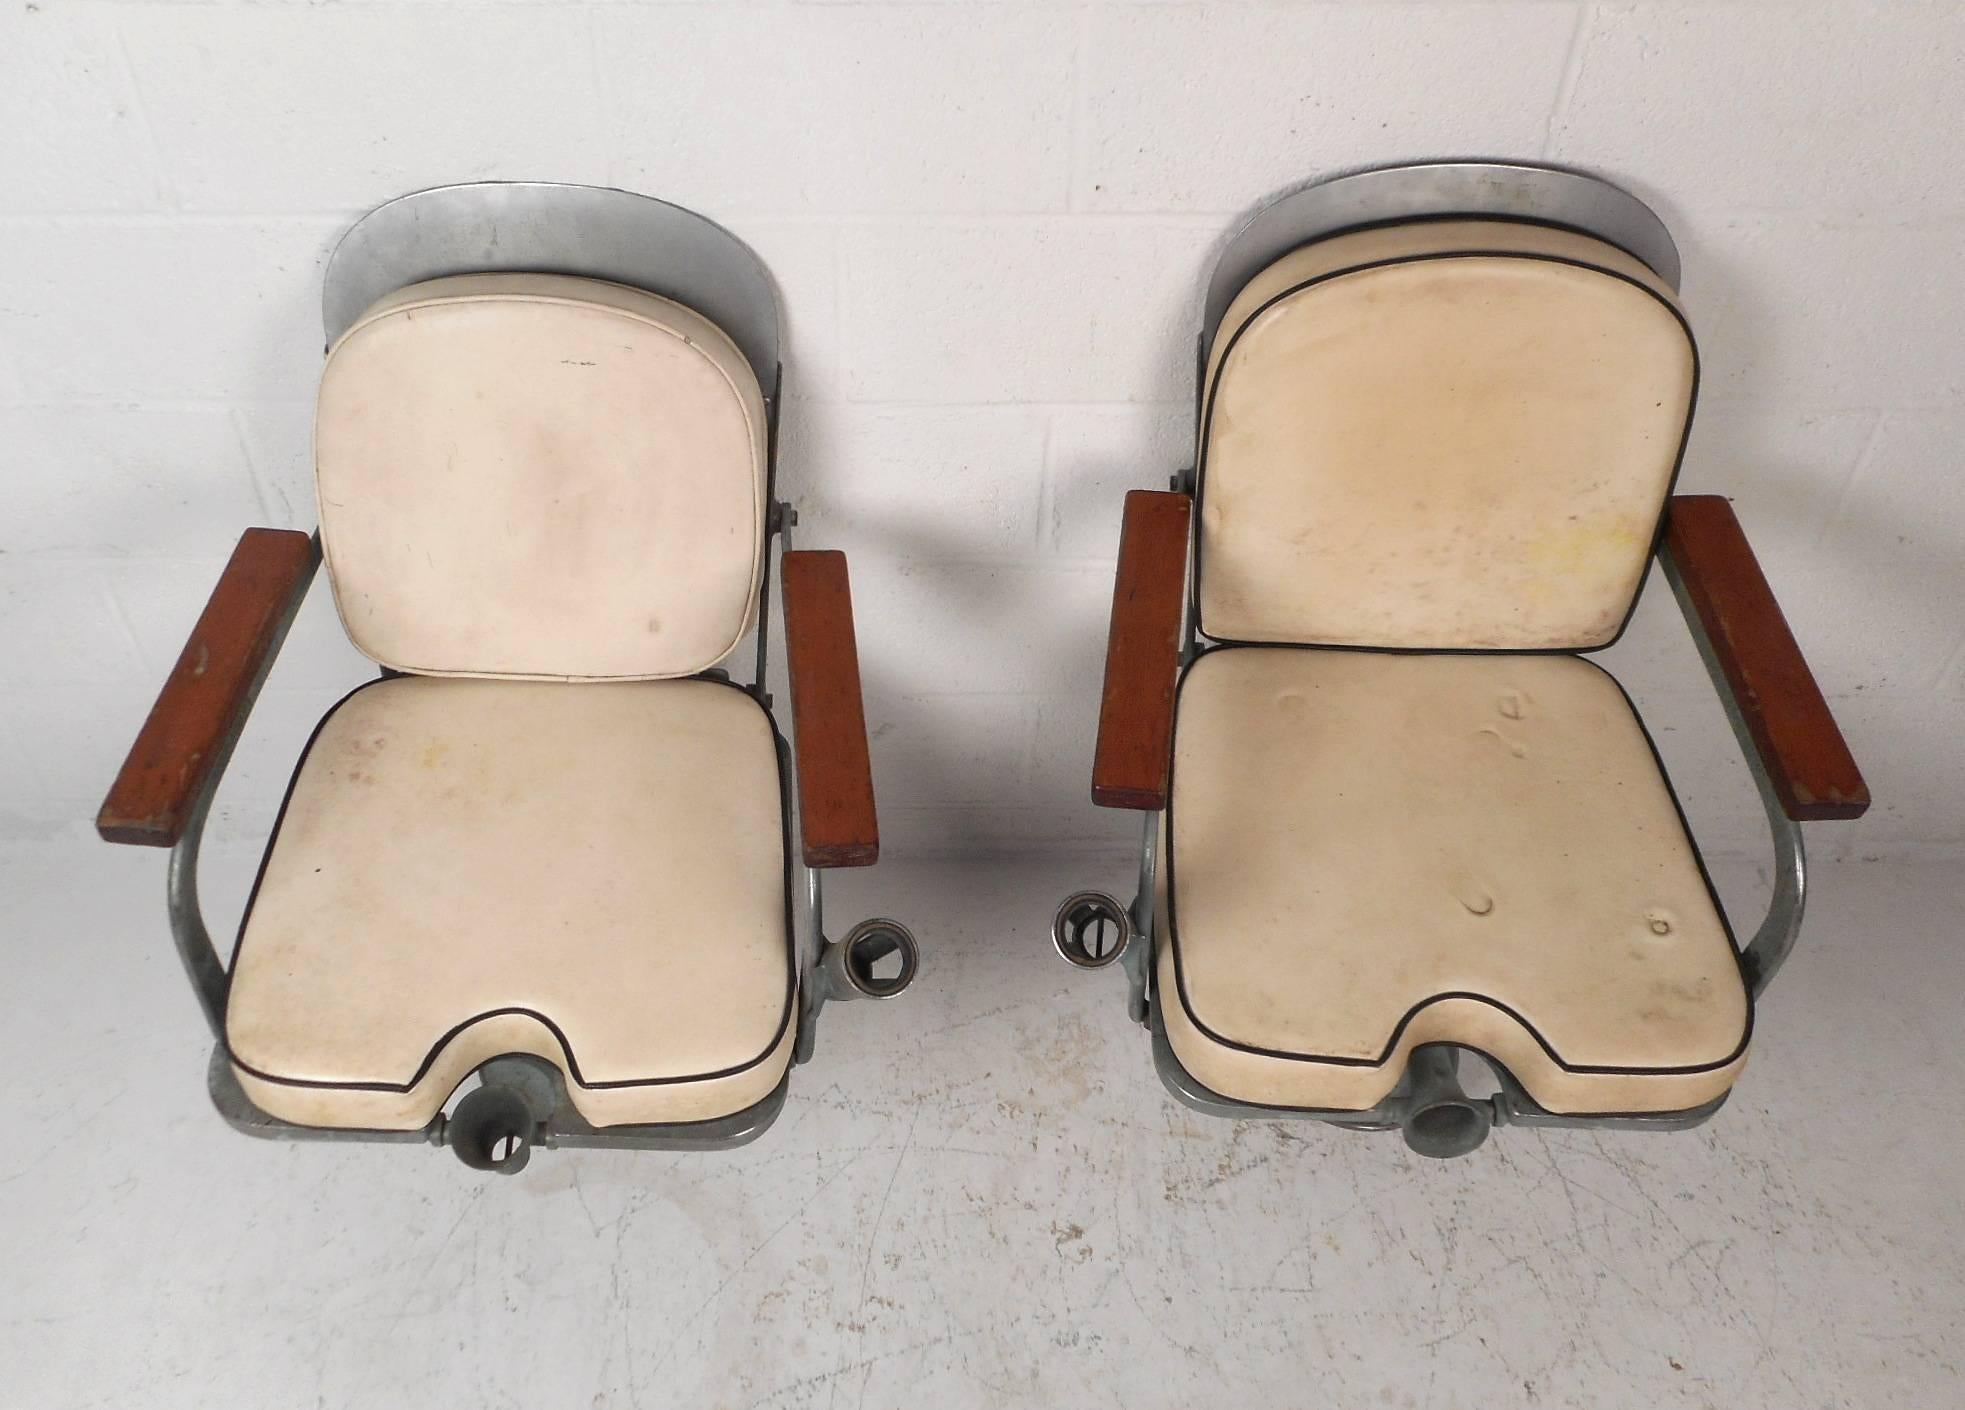 This beautiful pair of vintage boat chairs feature a heavy duty steel frame with wooden arm rests. This comfortable and sturdy pair of chairs have thick custom cushions. Unique design with a conveniently placed fishing pole holder on the side. This